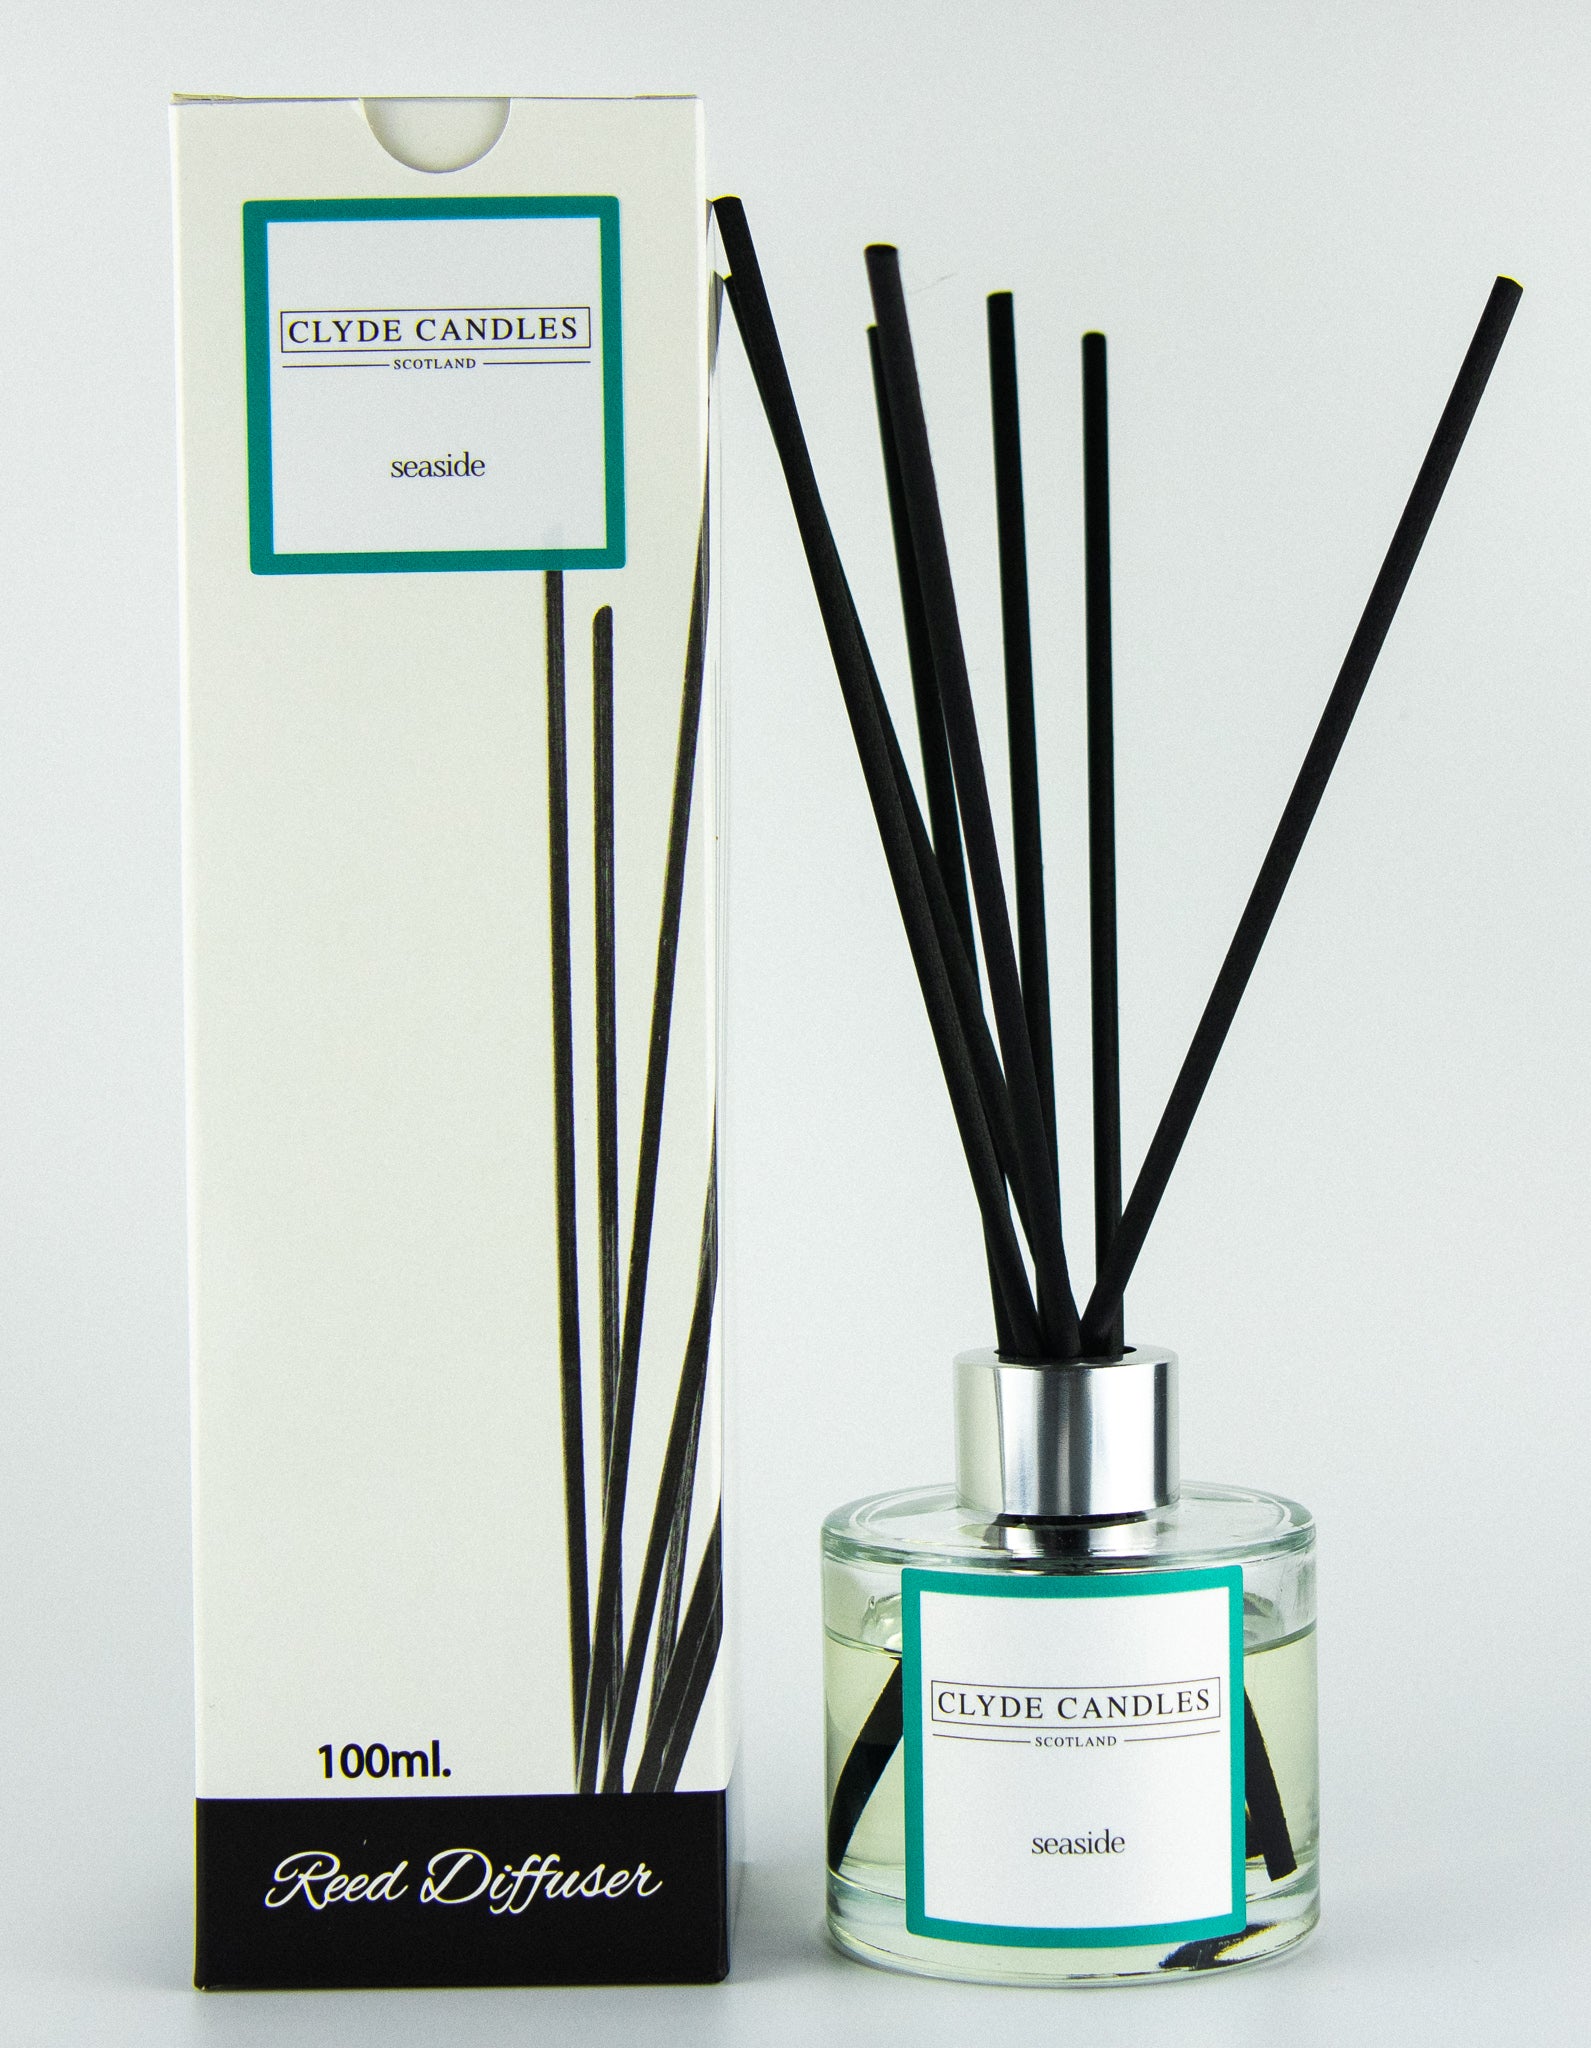 Seaside Reed Diffuser - Clyde Candles, Luxury Diffuser Oil with a Set of 7 Fibre Sticks, 100ml, Best Aroma Scent for Home, Kitchen, Living Room, Bathroom. Fragrance Diffusers set with sticks